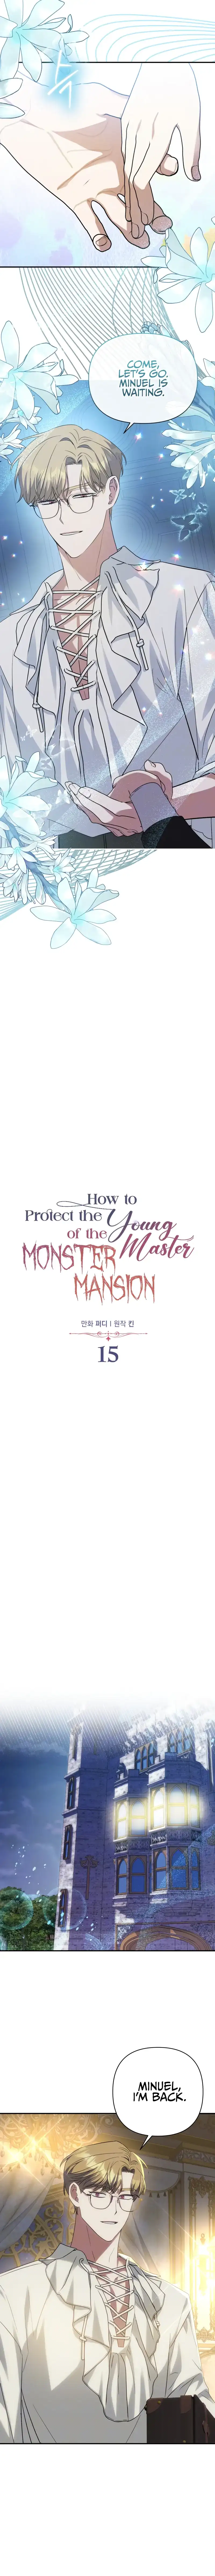 How to Protect the Master of the Monster Mansion  - page 4